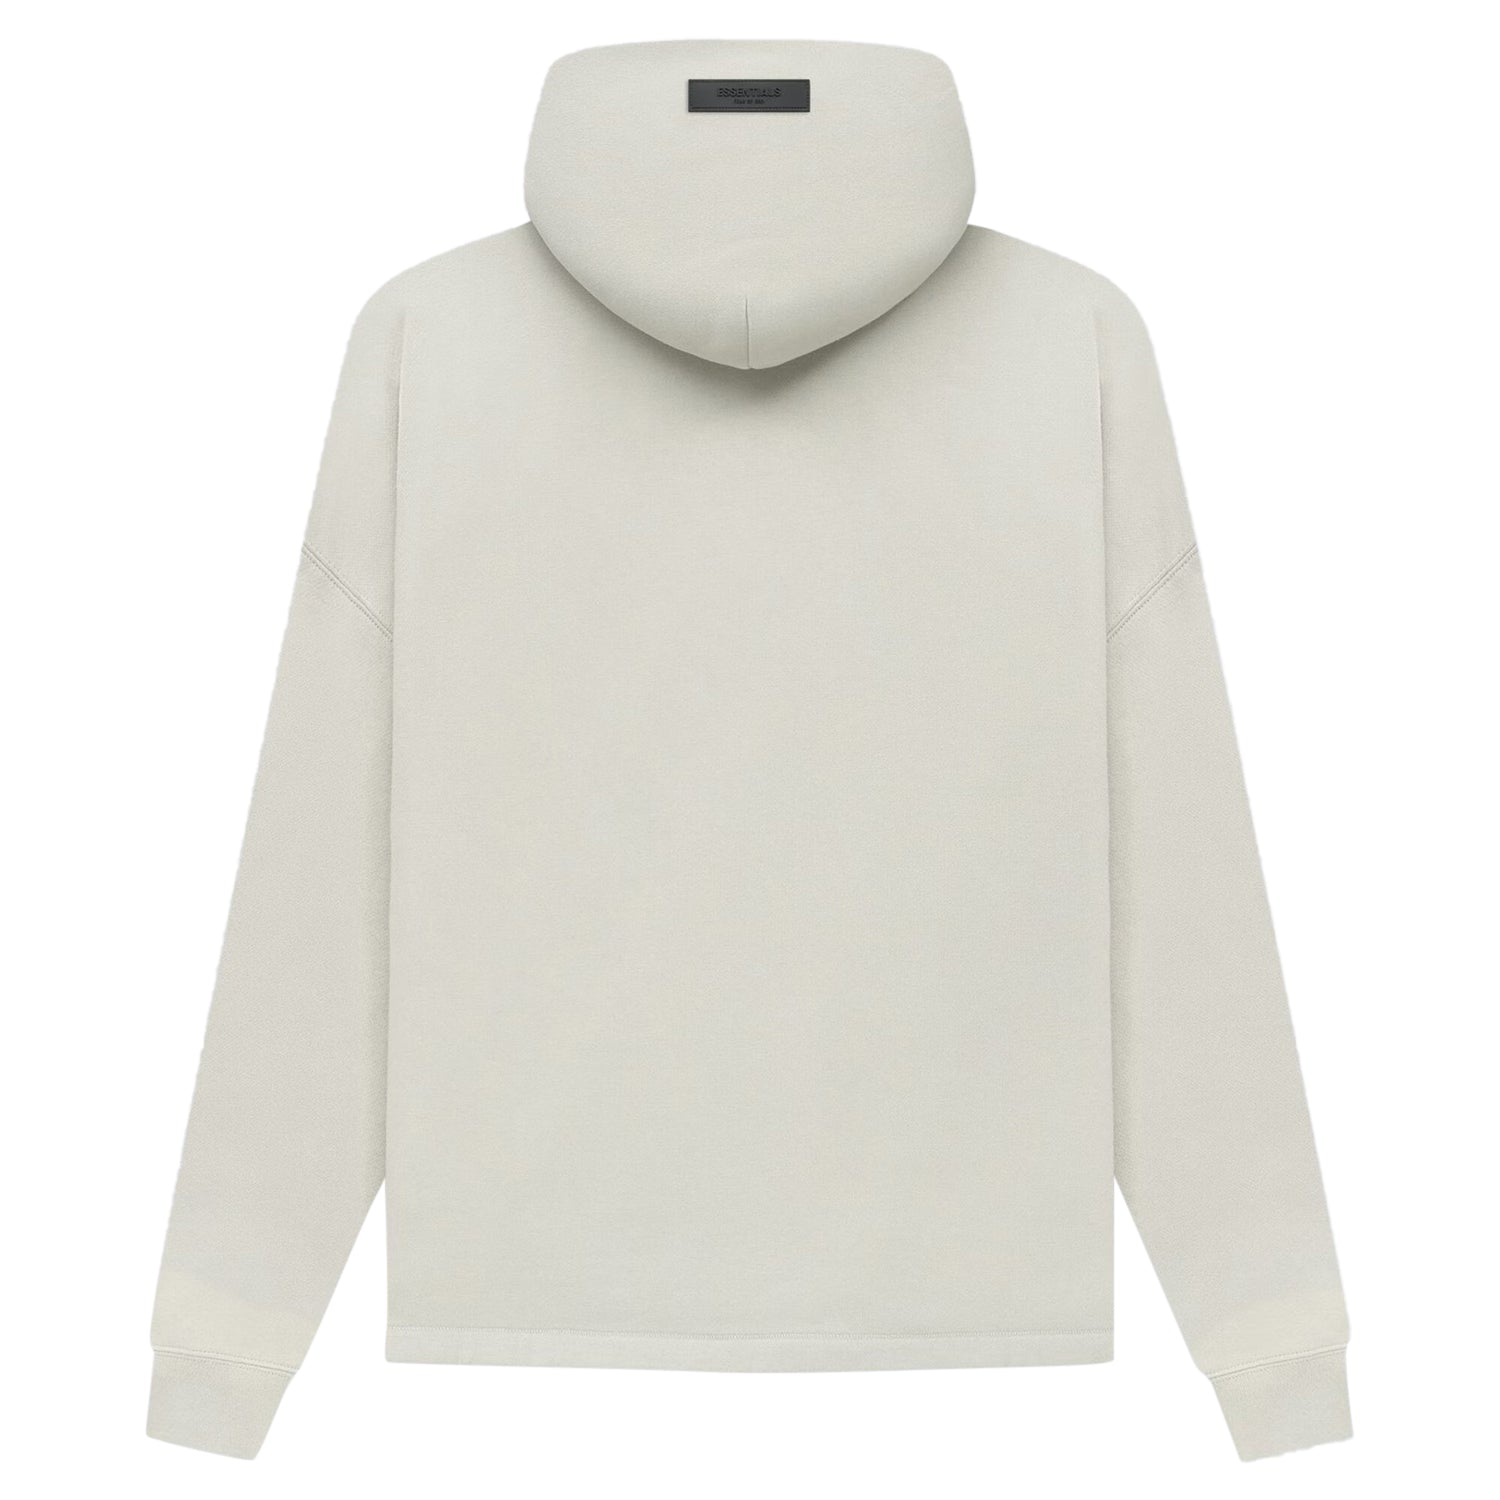 Fear Of God Essentials Relaxed Hoodie Mens Style : 1000000024